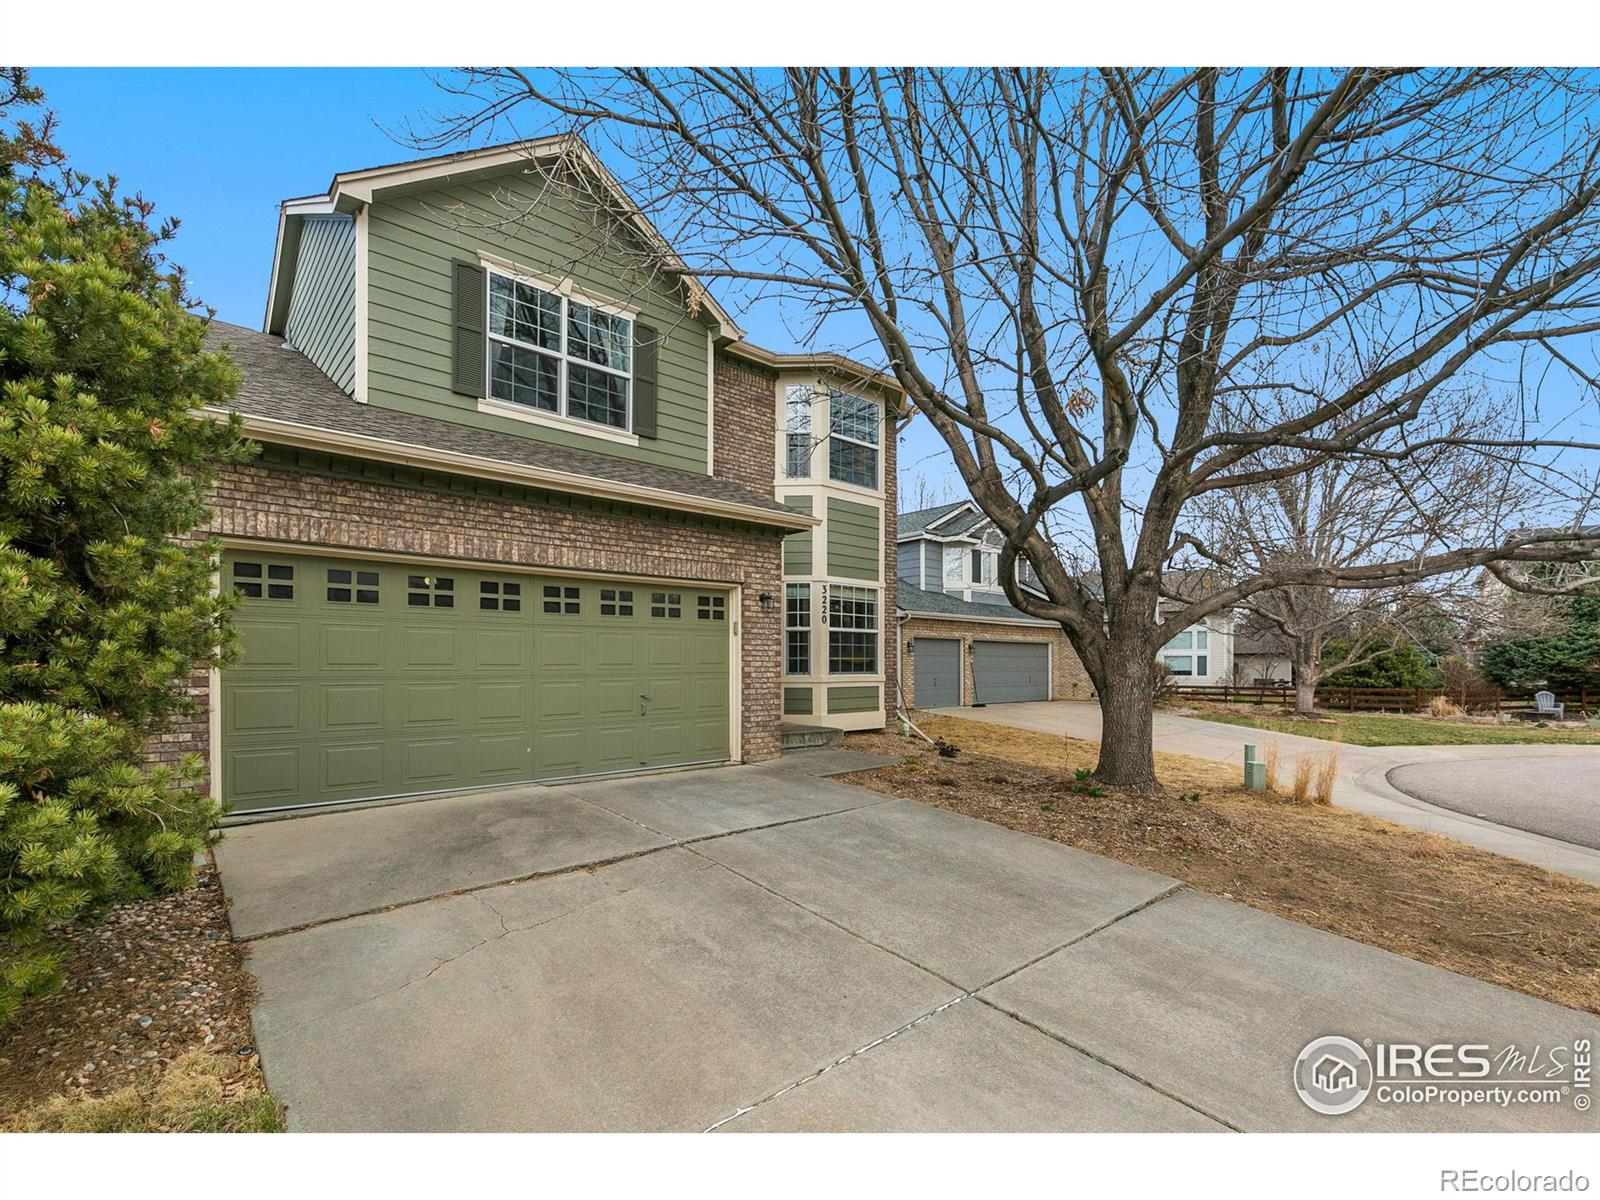 Report Image for 3220  Yellowstone Circle,Fort Collins, Colorado